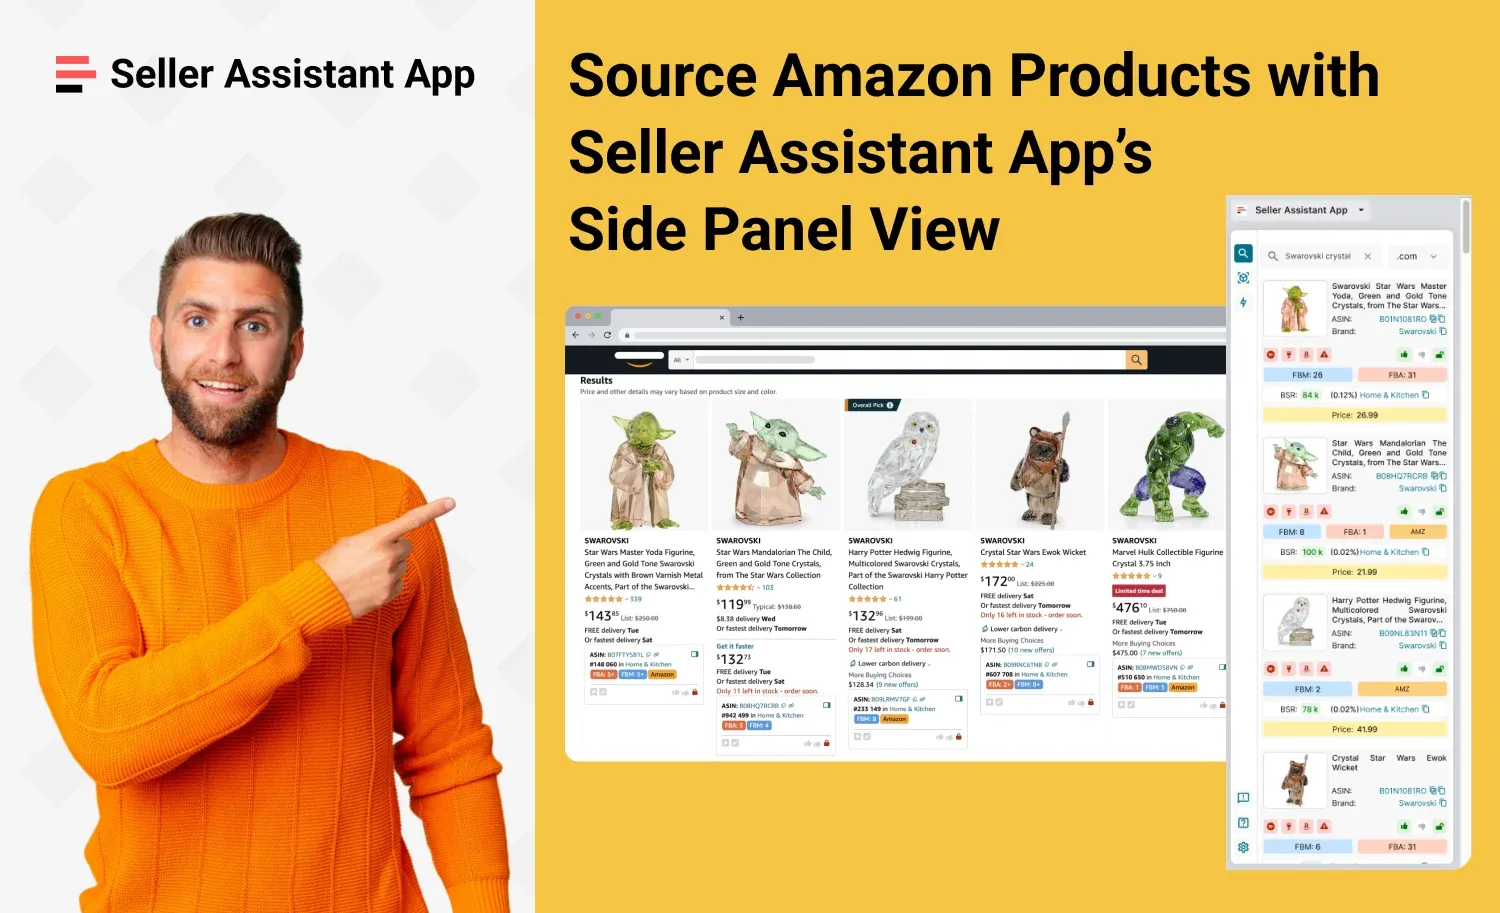 How to Source Amazon Products with Seller Assistant’s Side Panel View?